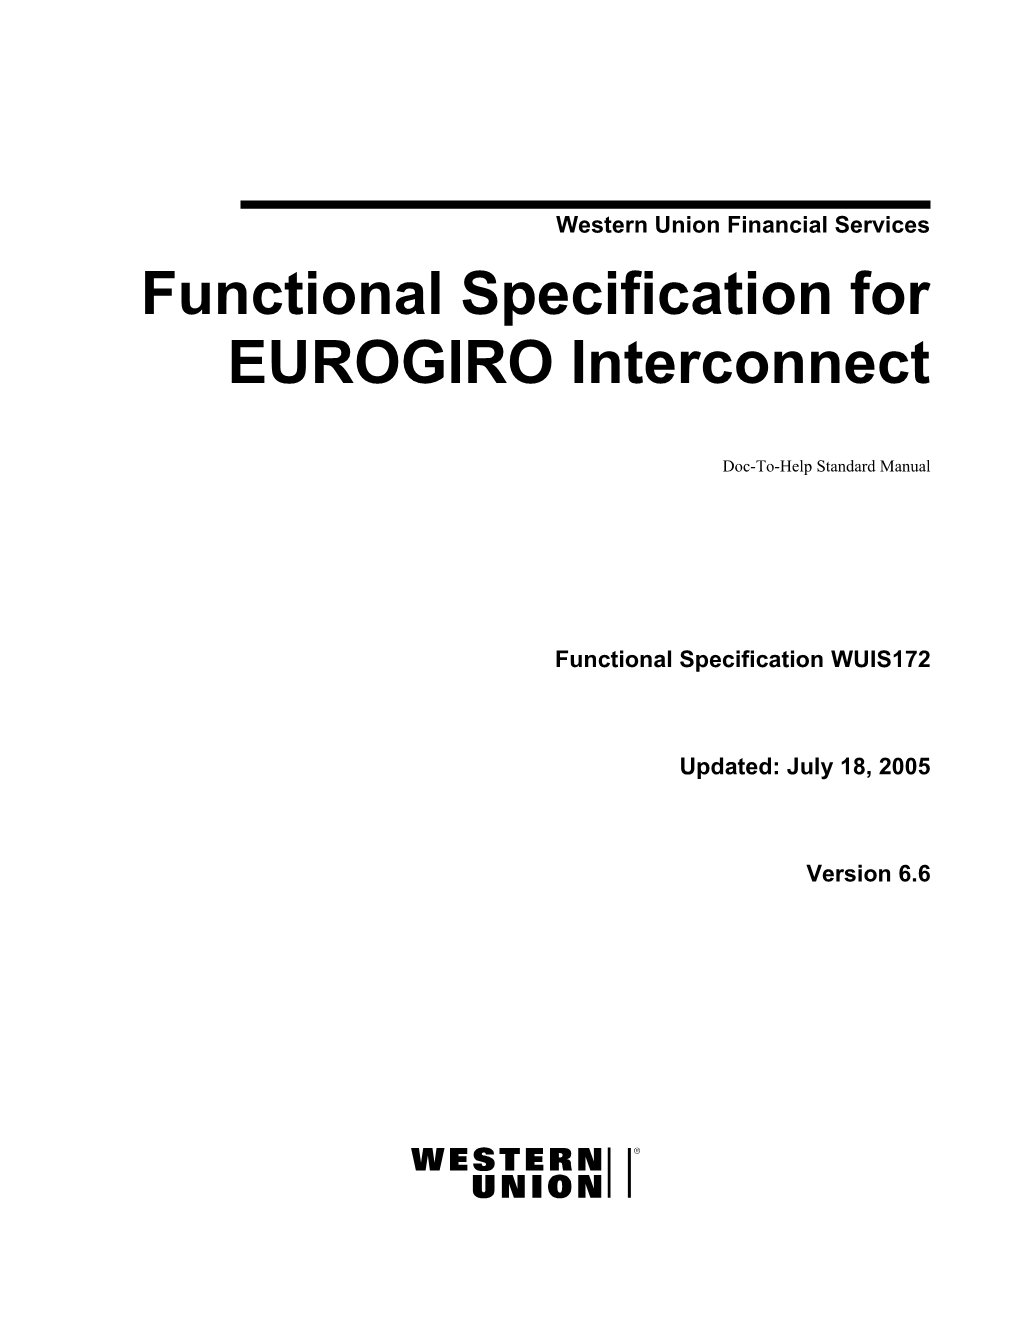 Functional Specification for EUROGIRO Interconnect